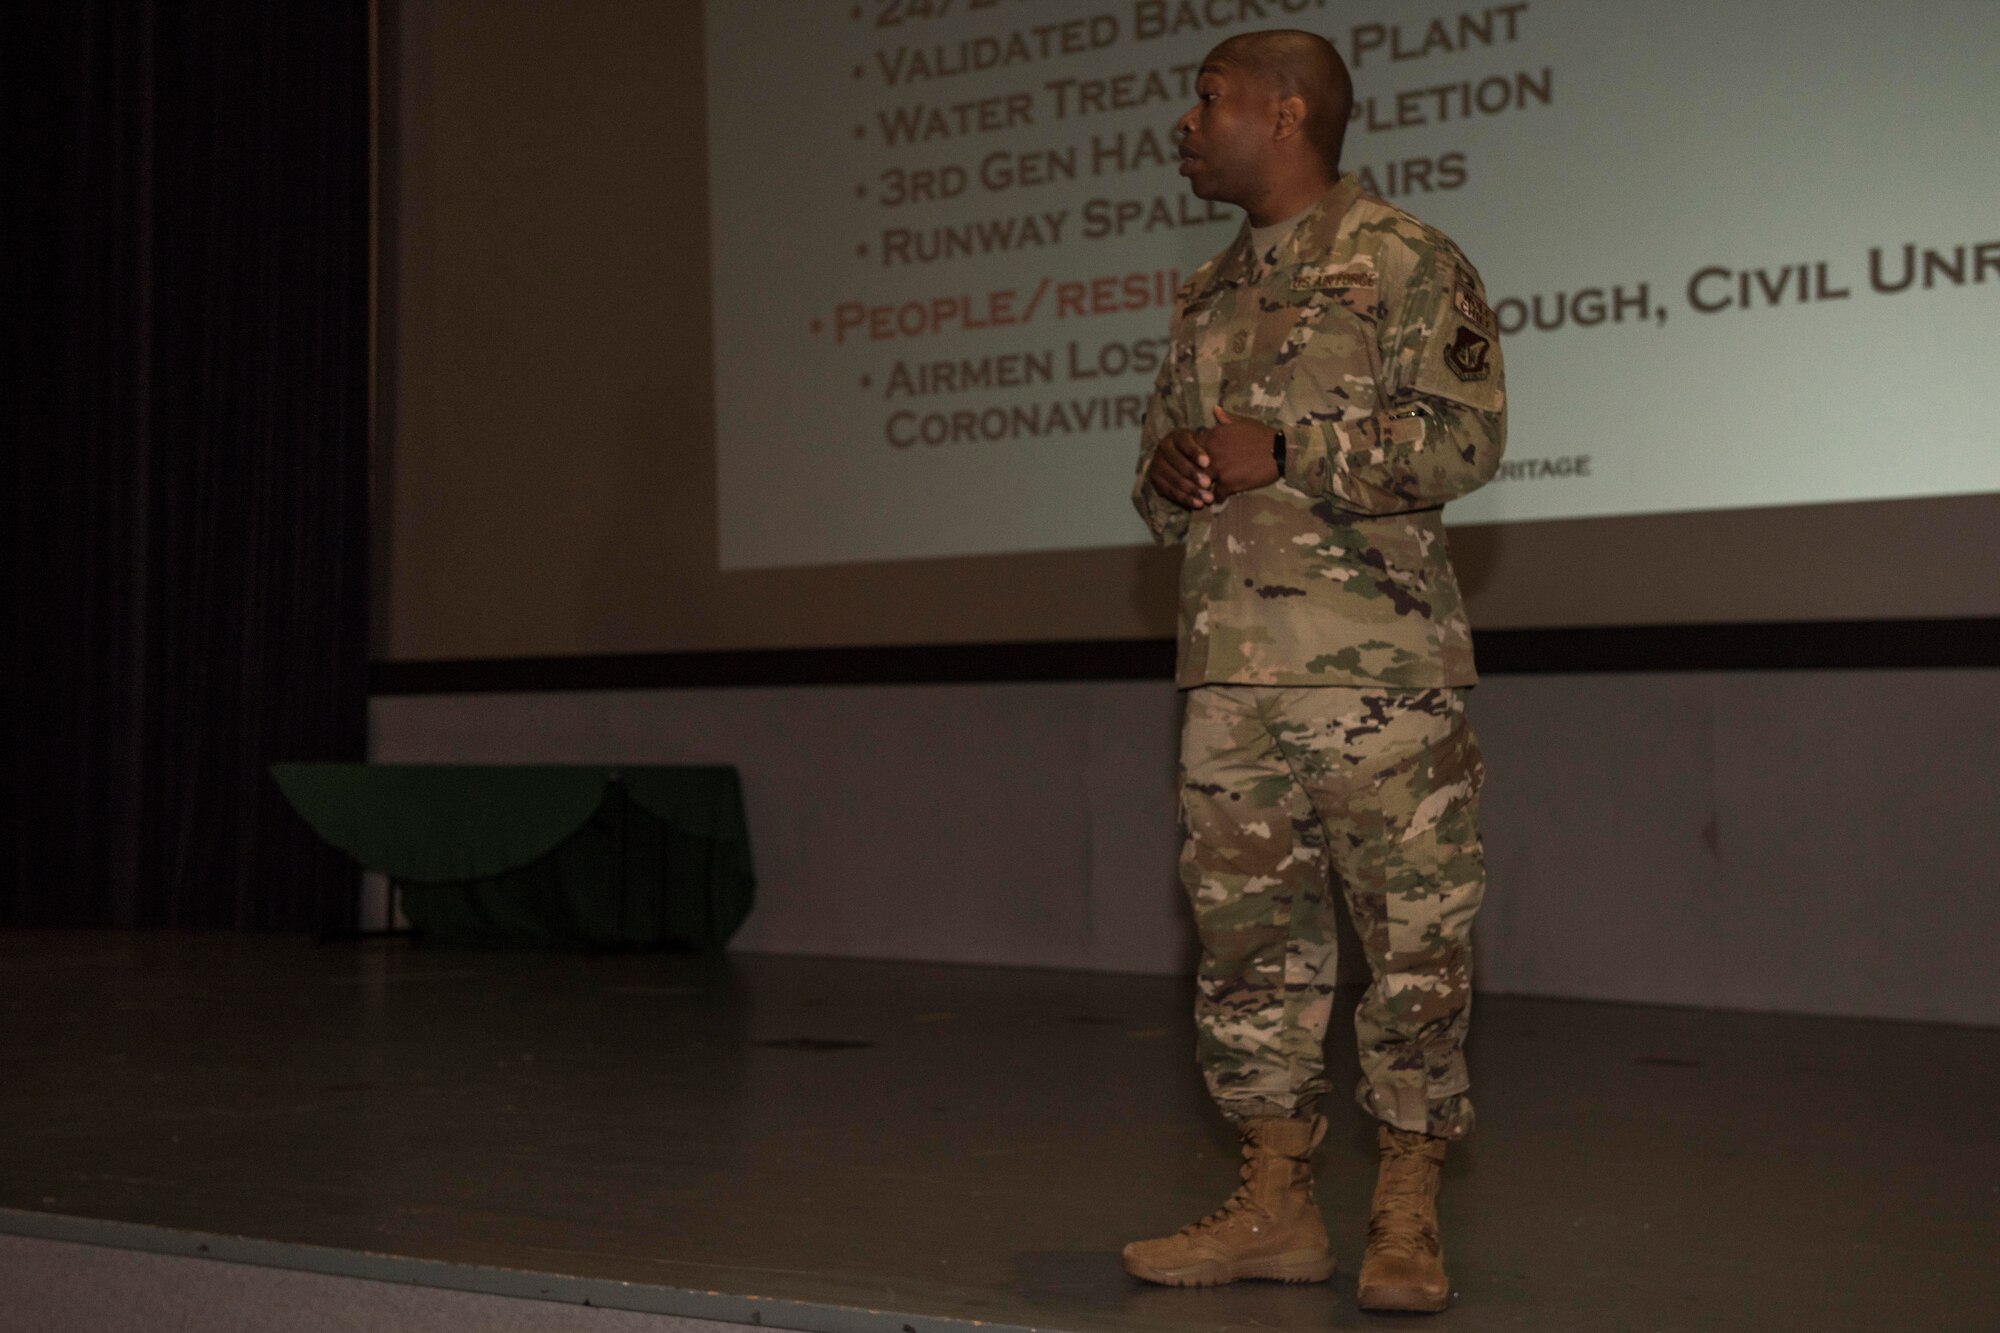 A photo of a command chief speaking.